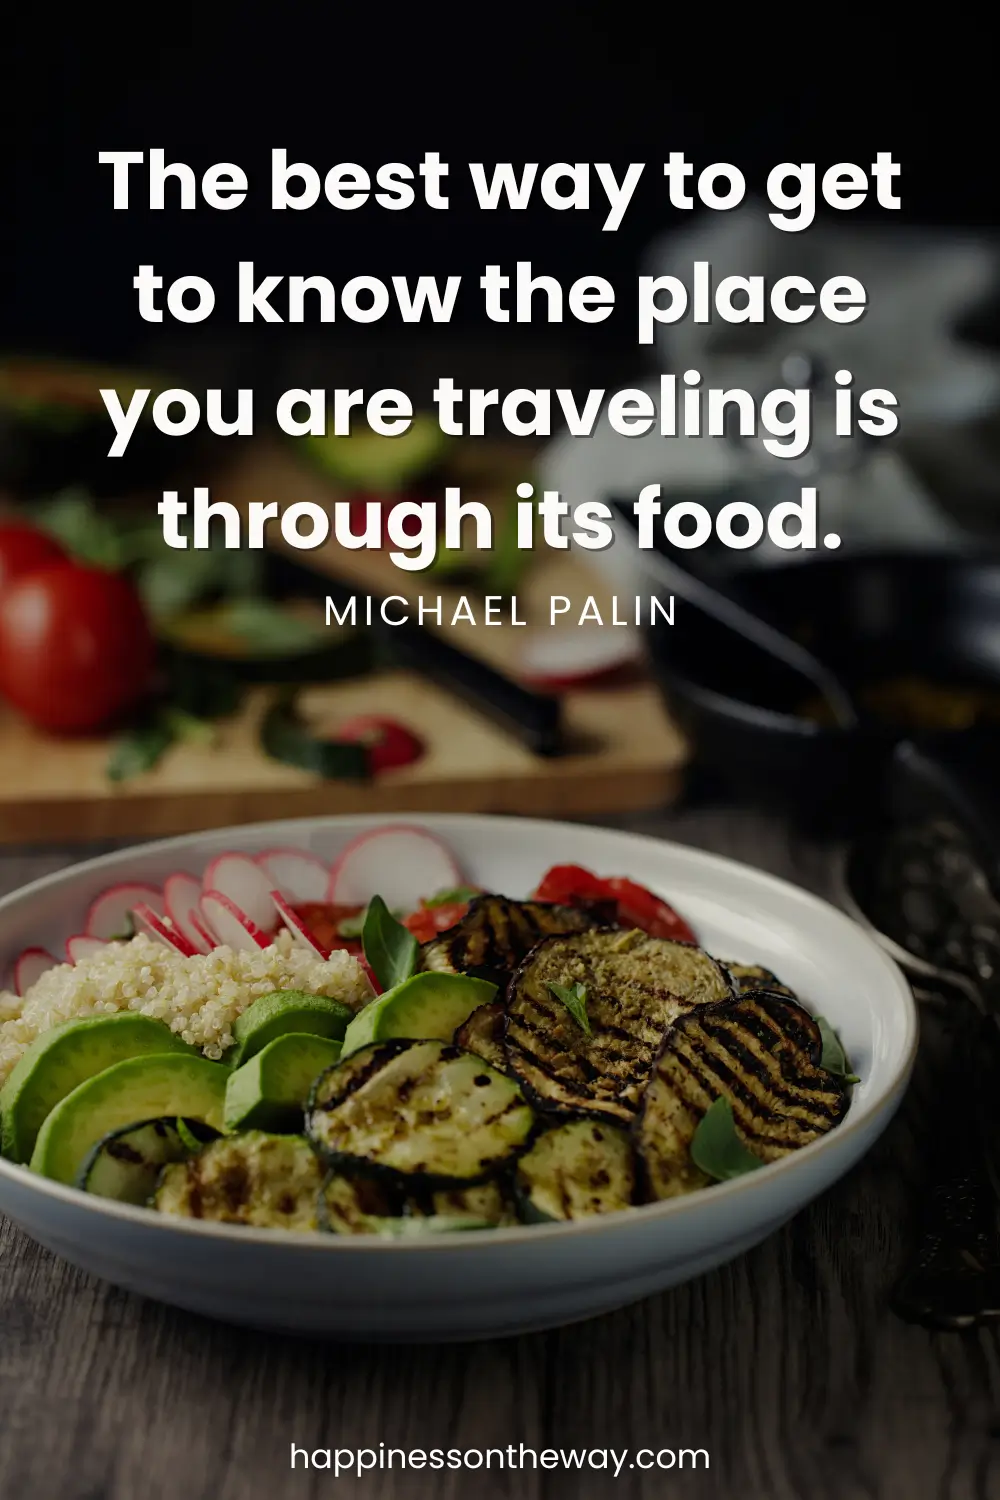 A gourmet plate of quinoa, grilled vegetables, and sliced radishes on a rustic wooden table, embodying the culinary exploration of slow travel with Michael Palin's quote 'The best way to get to know the place you are traveling is through its food.